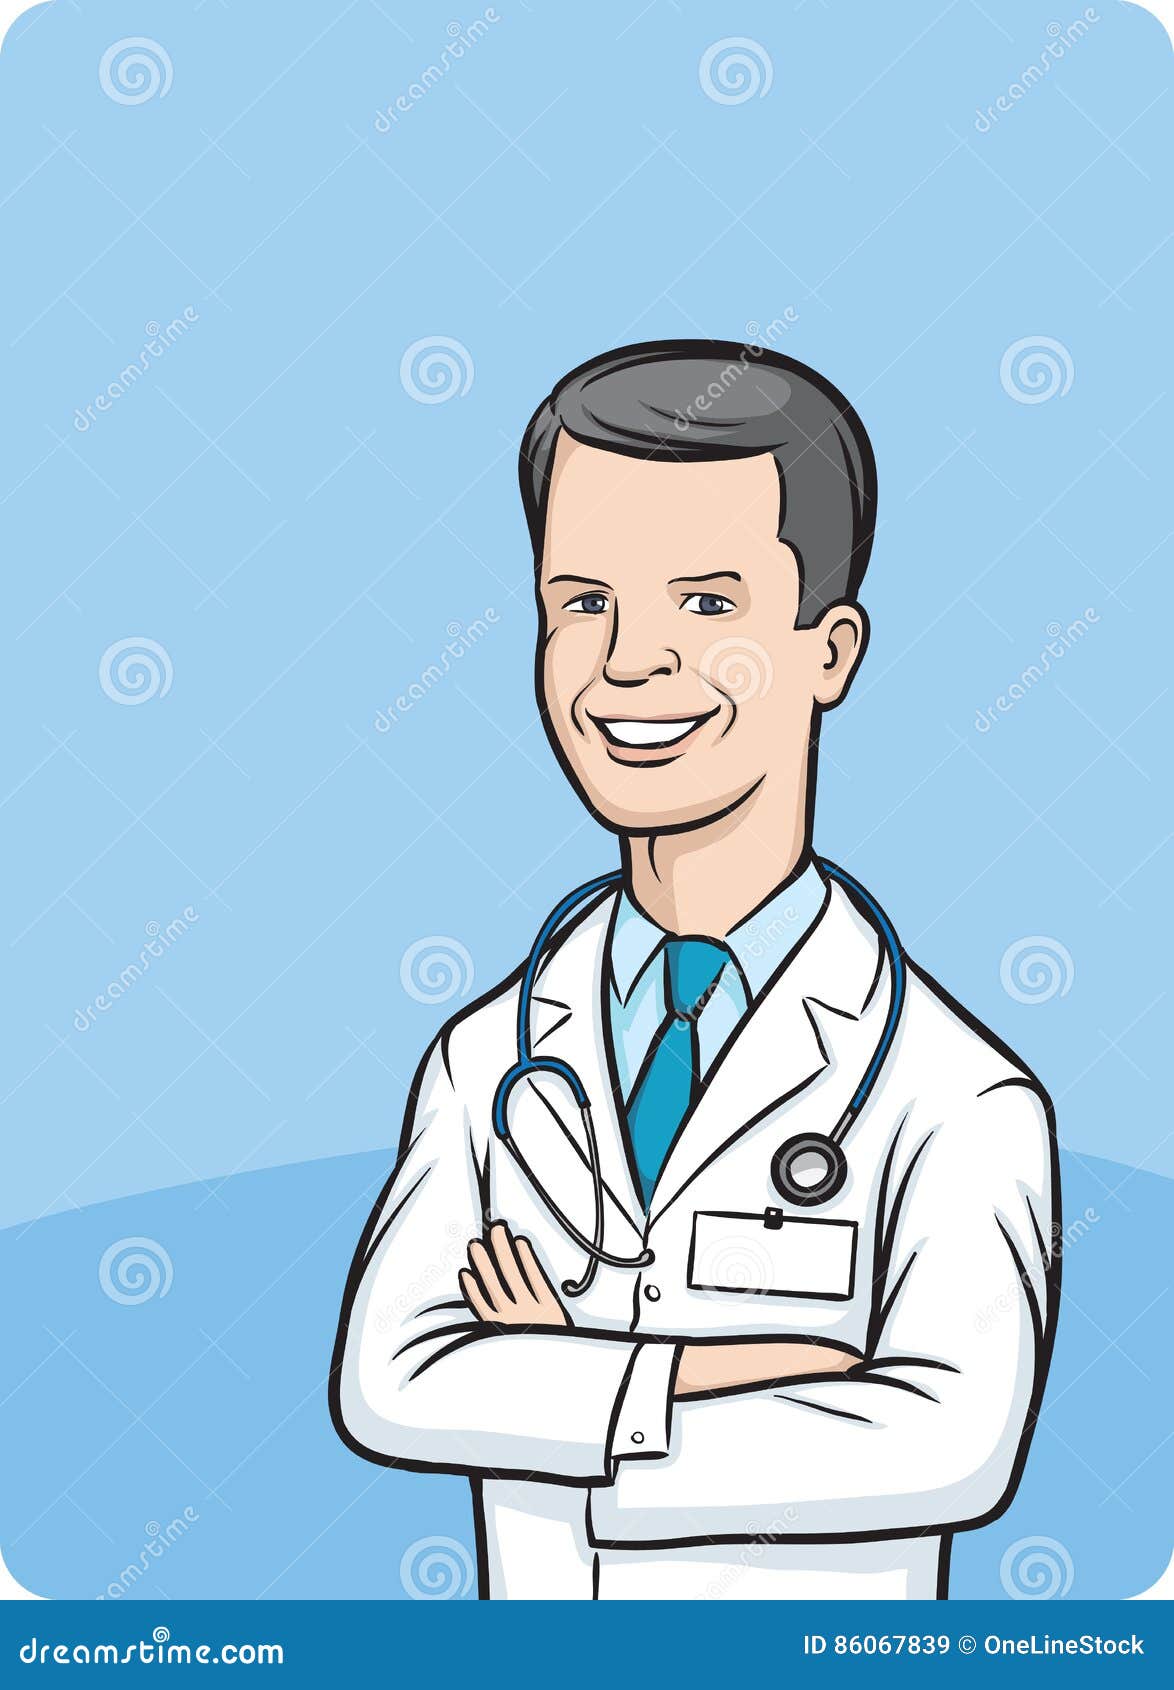 Cheerful Doctor Arms Crossed Stock Vector - Illustration of cheerful ...